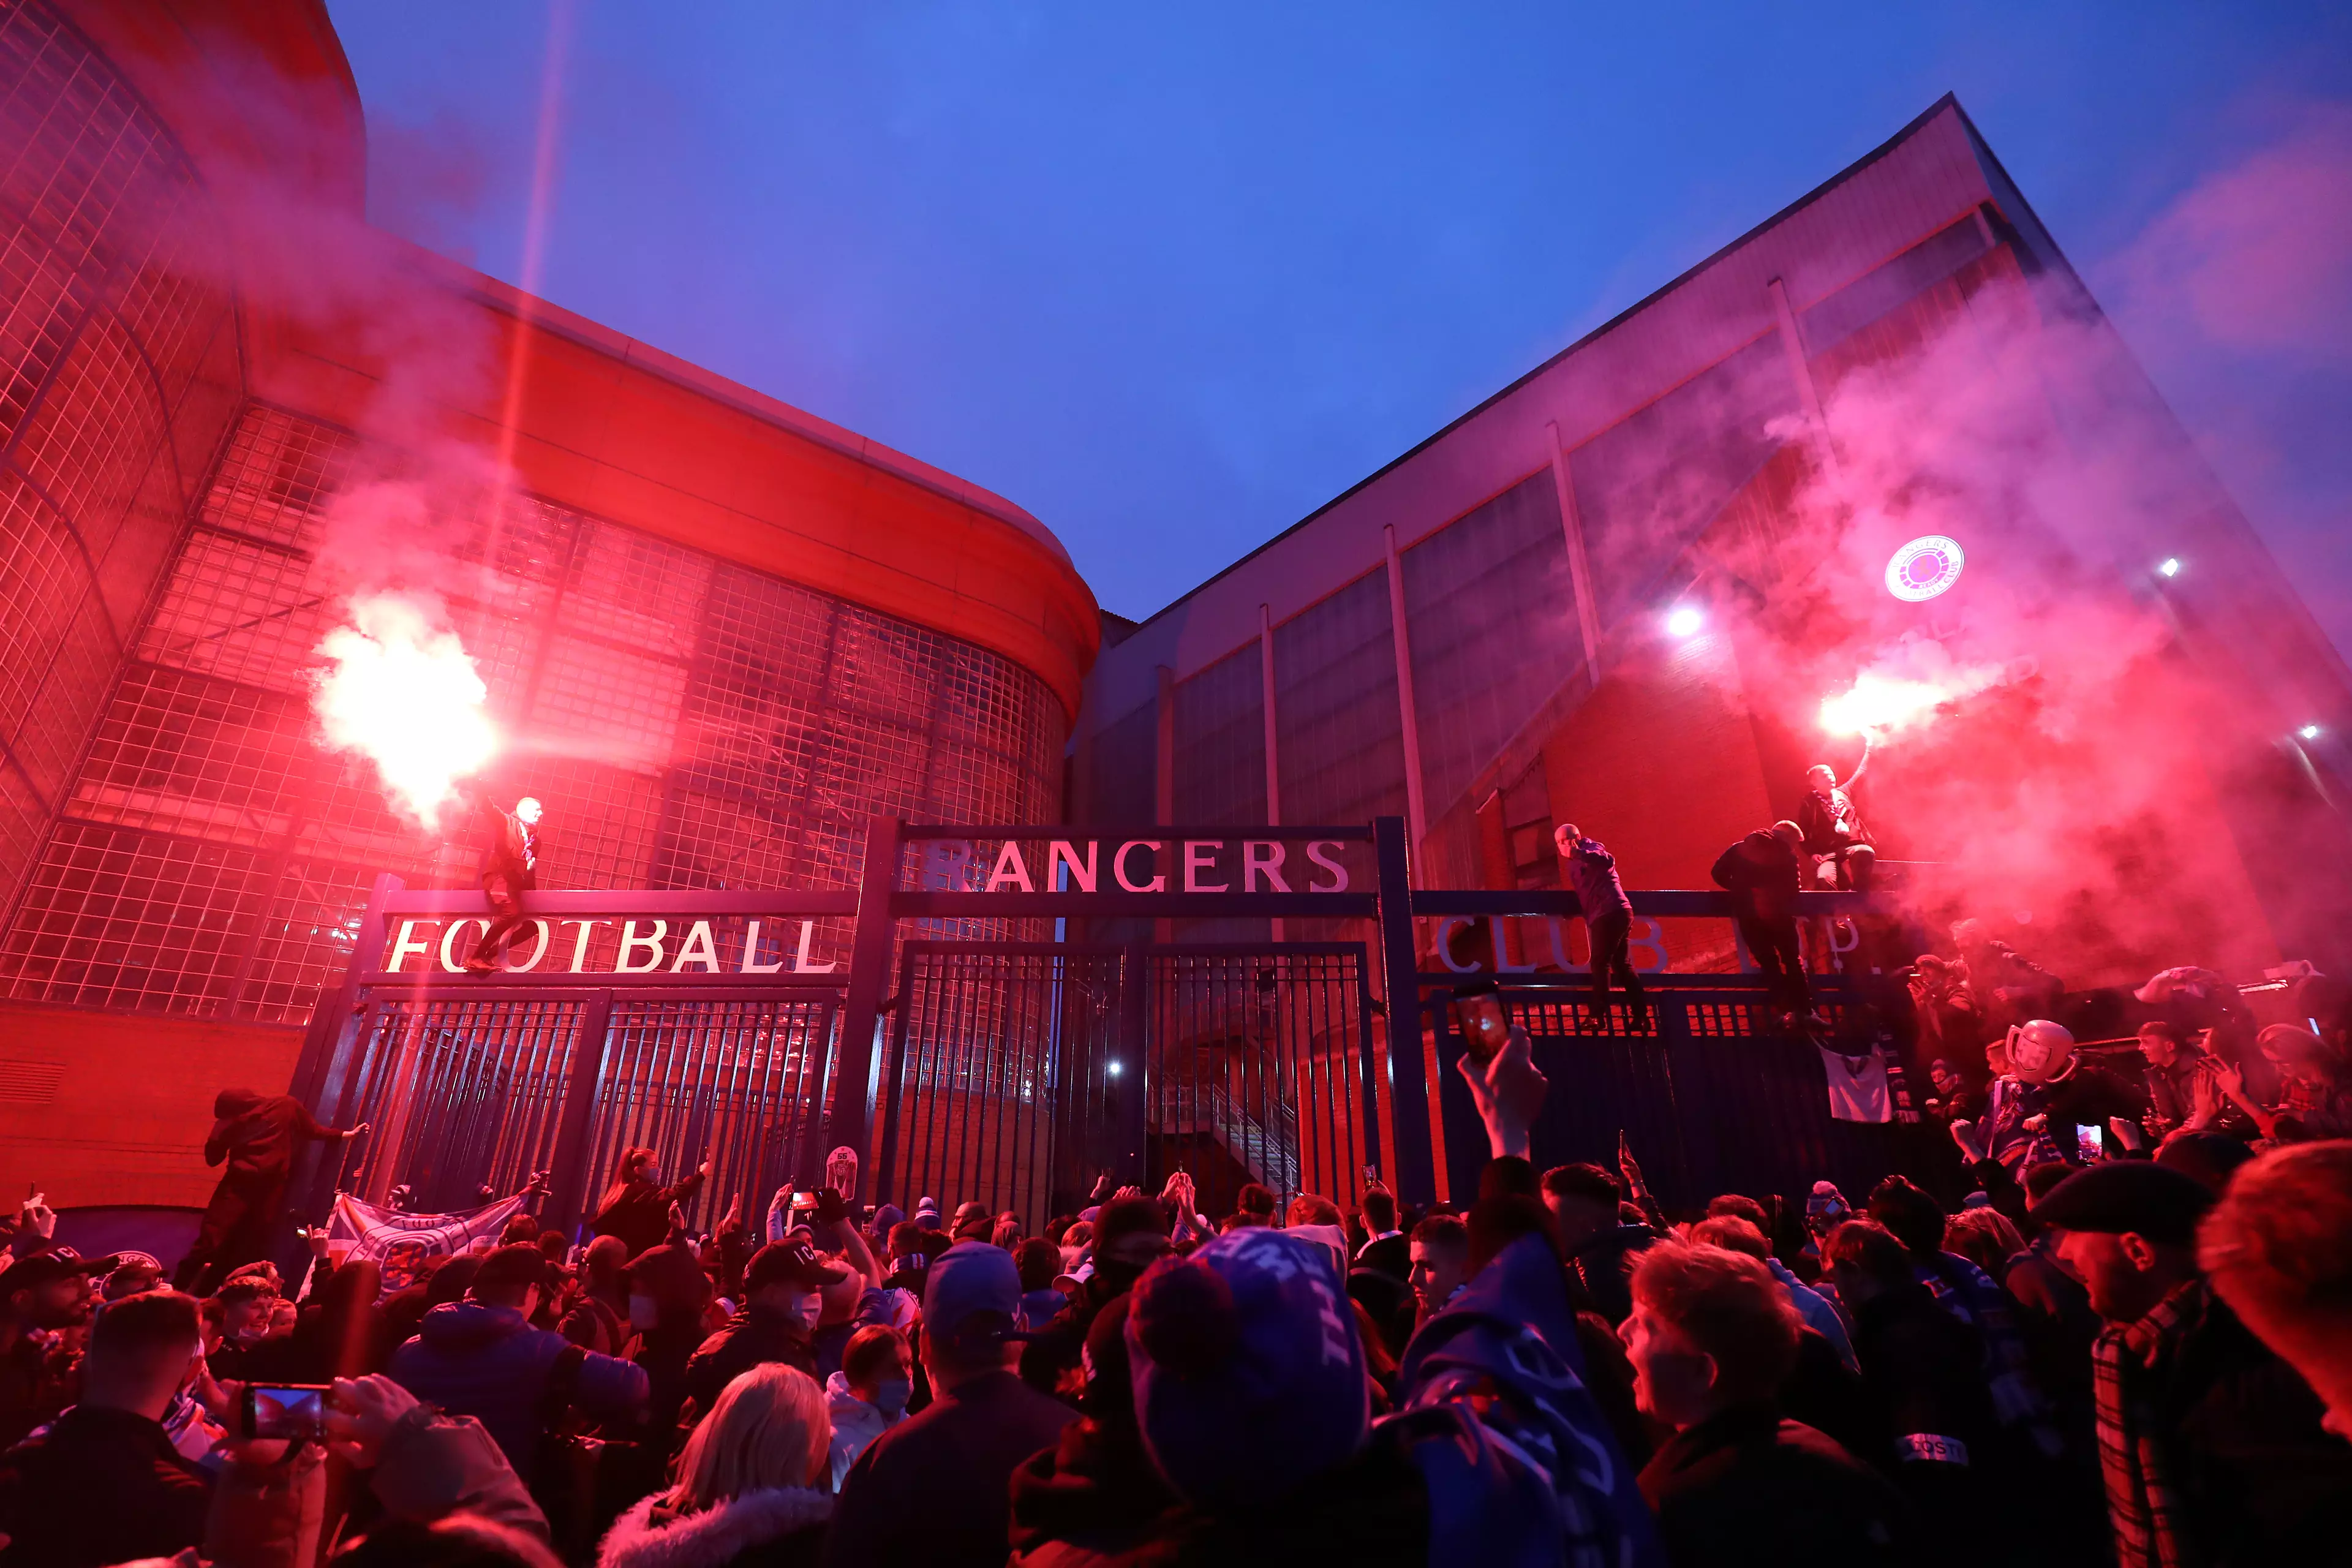 Rangers fans celebrate outside Ibrox. Image: PA Images